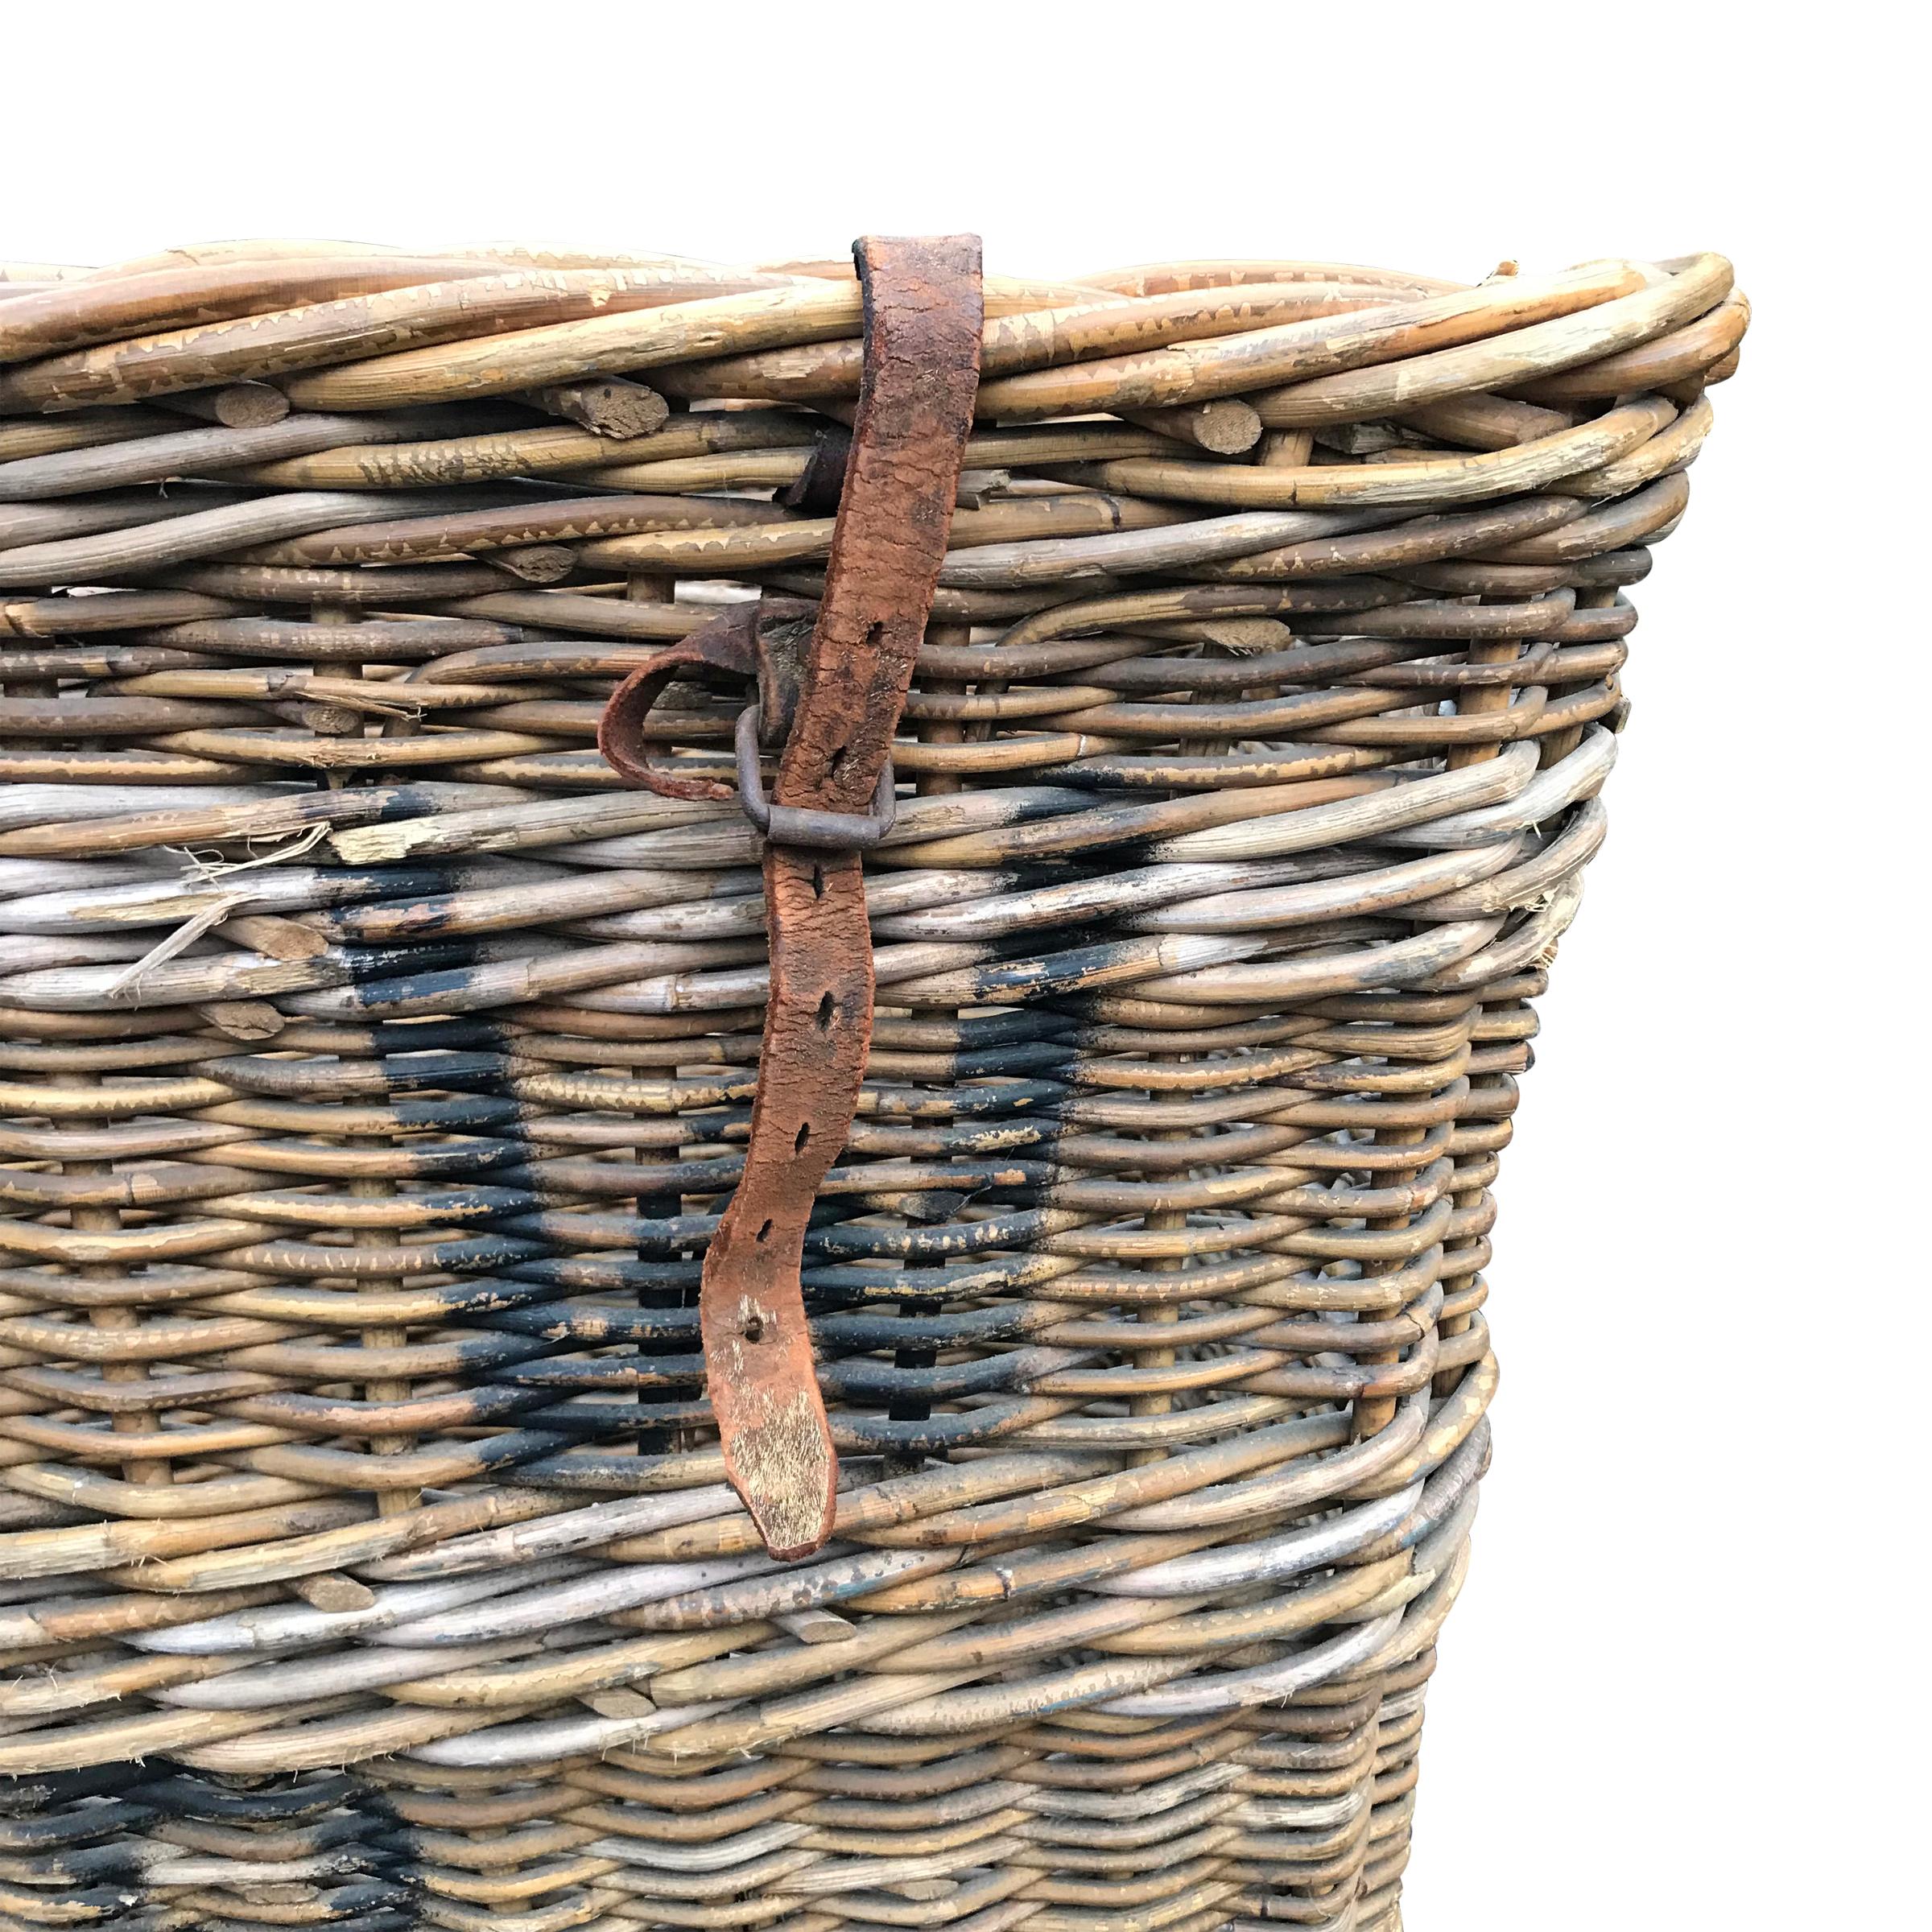 An early 20th century French vineyard handwoven basket, used to send grapes to press. The basket is painted with the initials of the vineyard, as well as the basket number. Original leather tie down straps remain. One handle is missing, and there